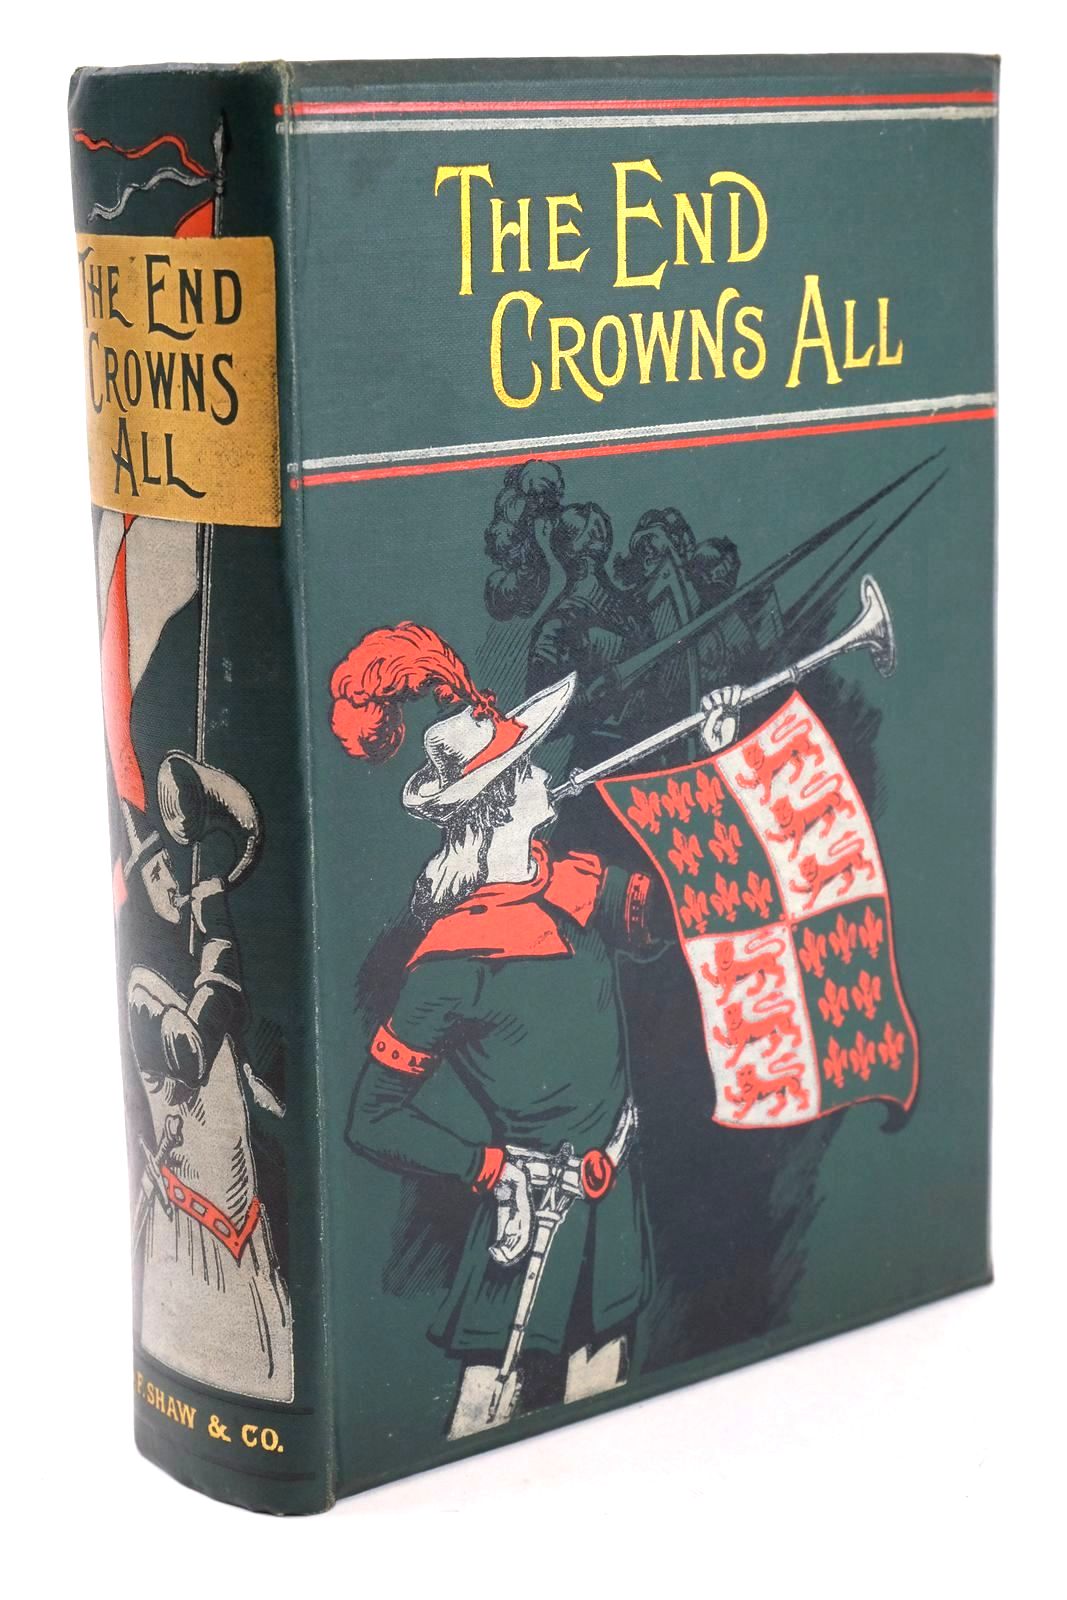 Photo of THE END CROWNS ALL written by Marshall, Emma published by John F. Shaw &amp; Co. (STOCK CODE: 1324054)  for sale by Stella & Rose's Books